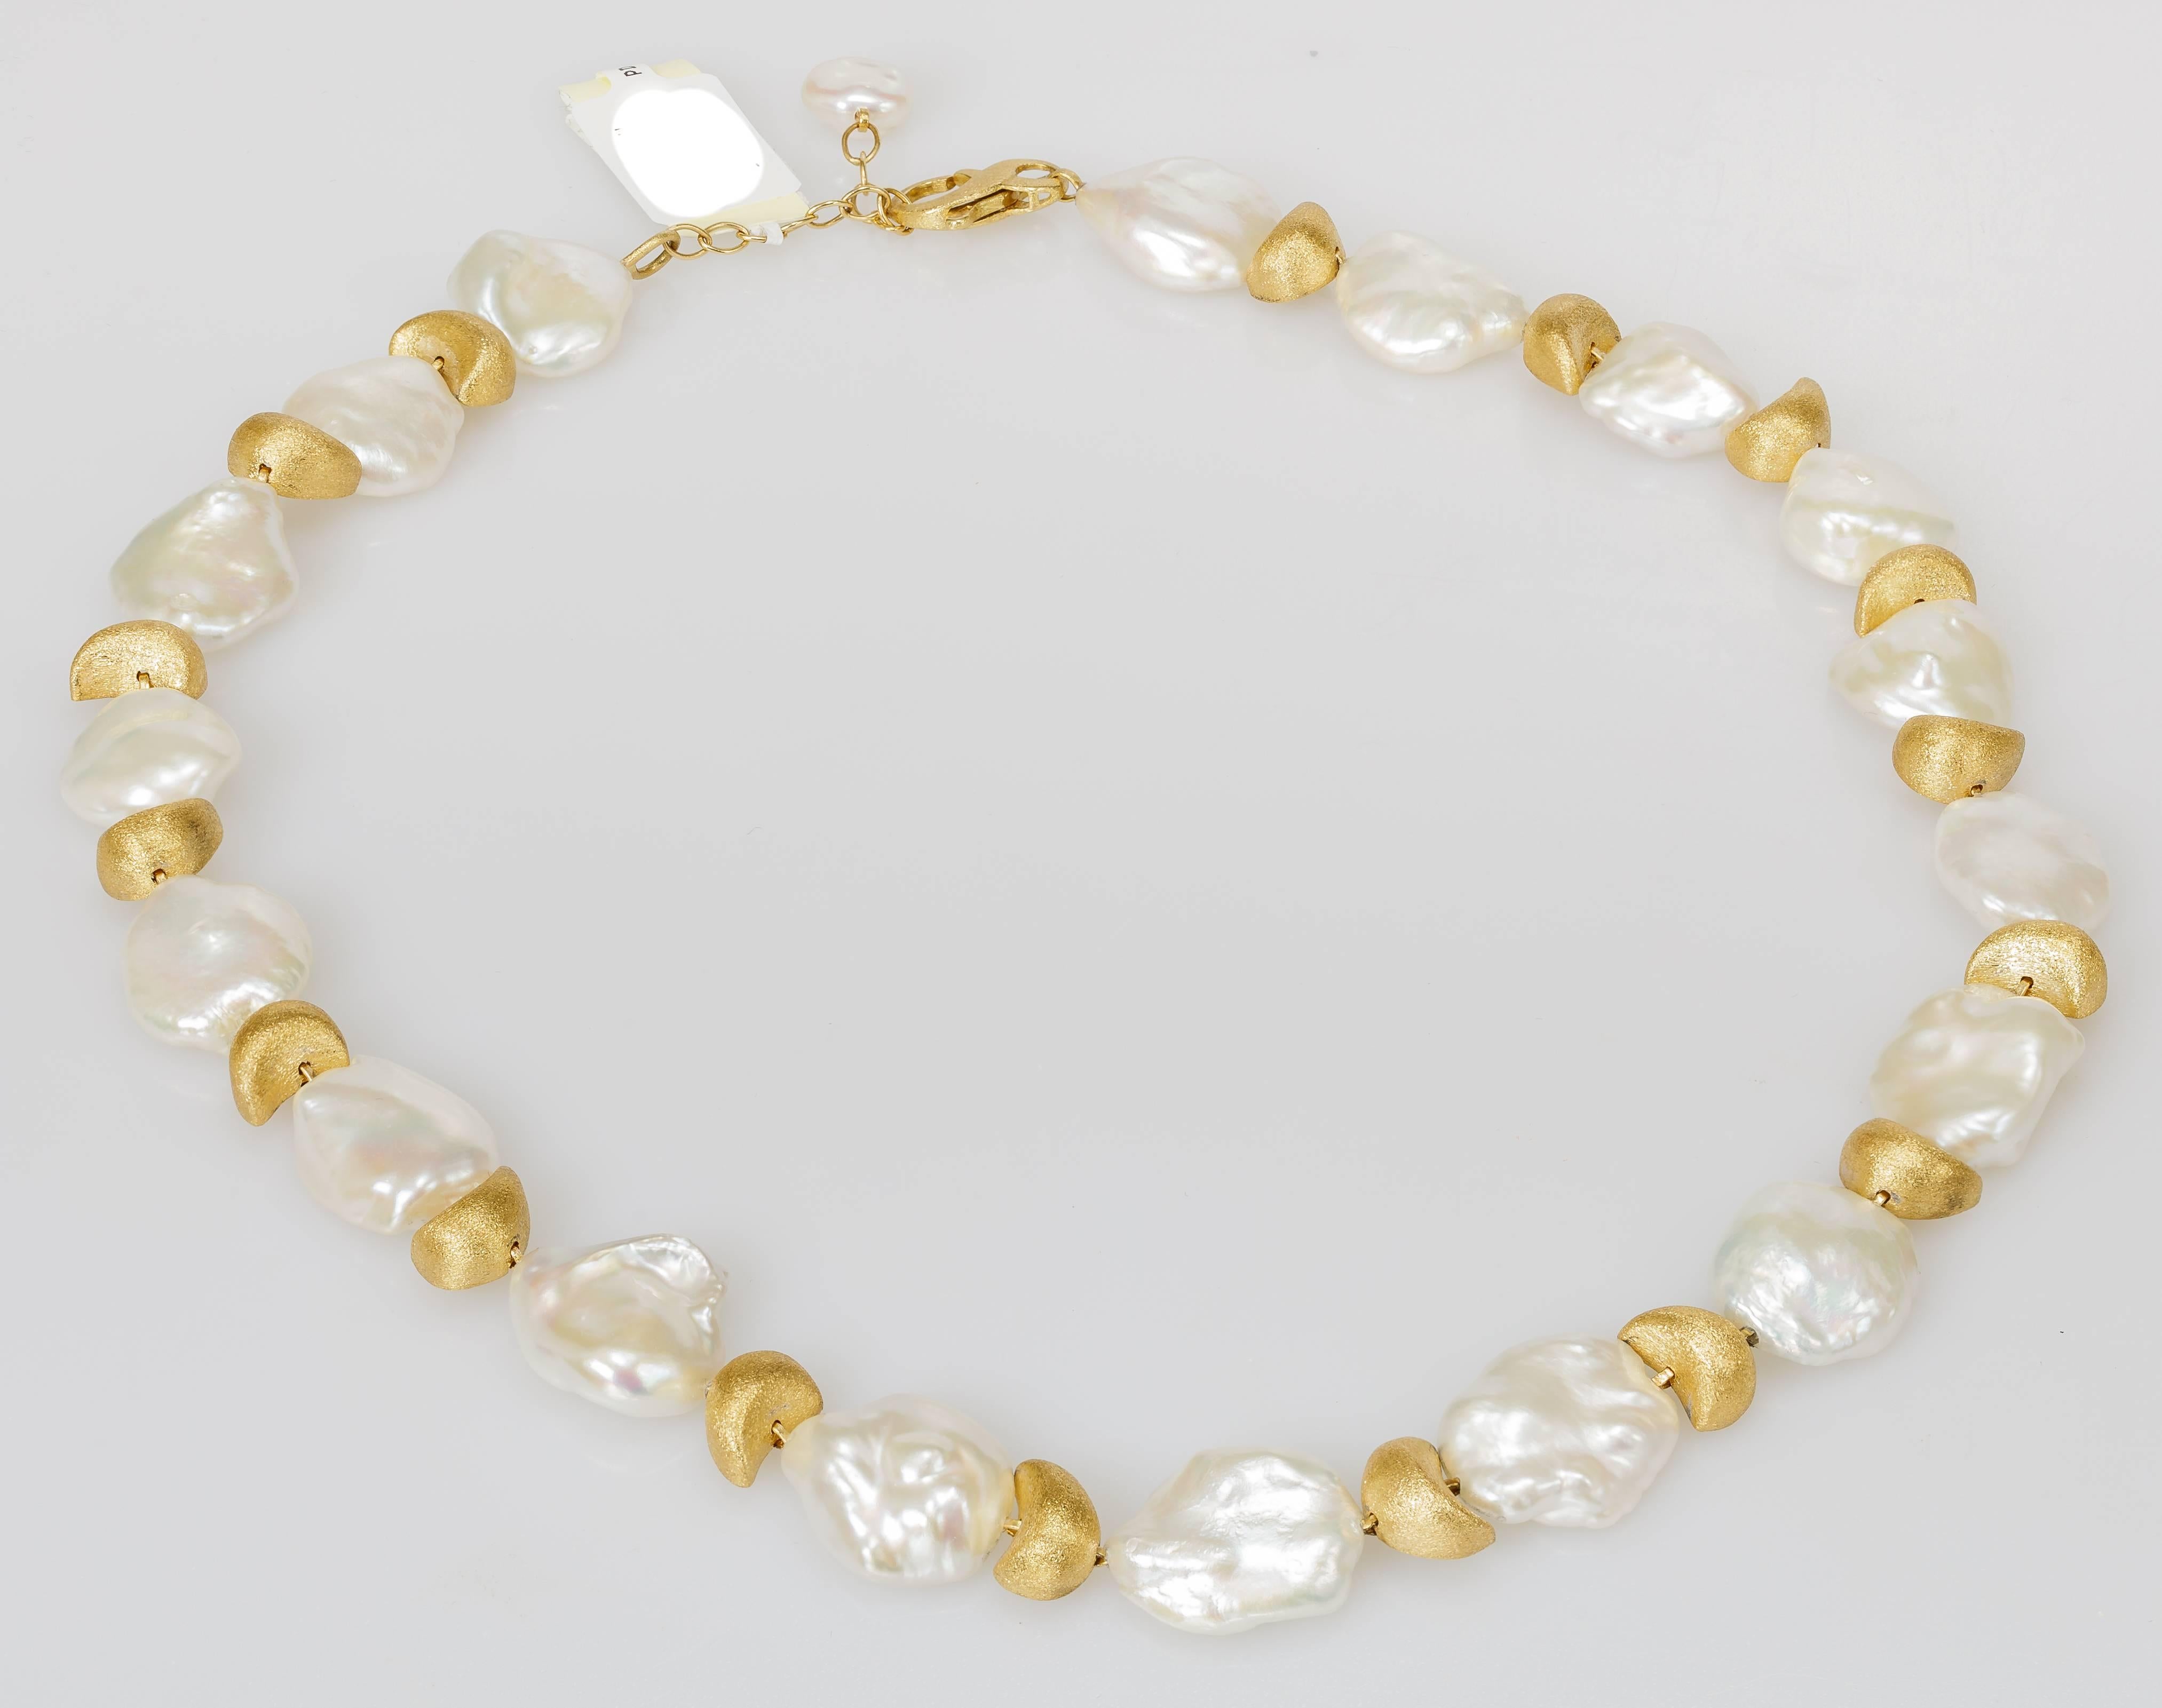 This Yvel necklace features freshwater keshi pearls alternating with 18k yellow gold beads.  The necklace measures 18 inches long.